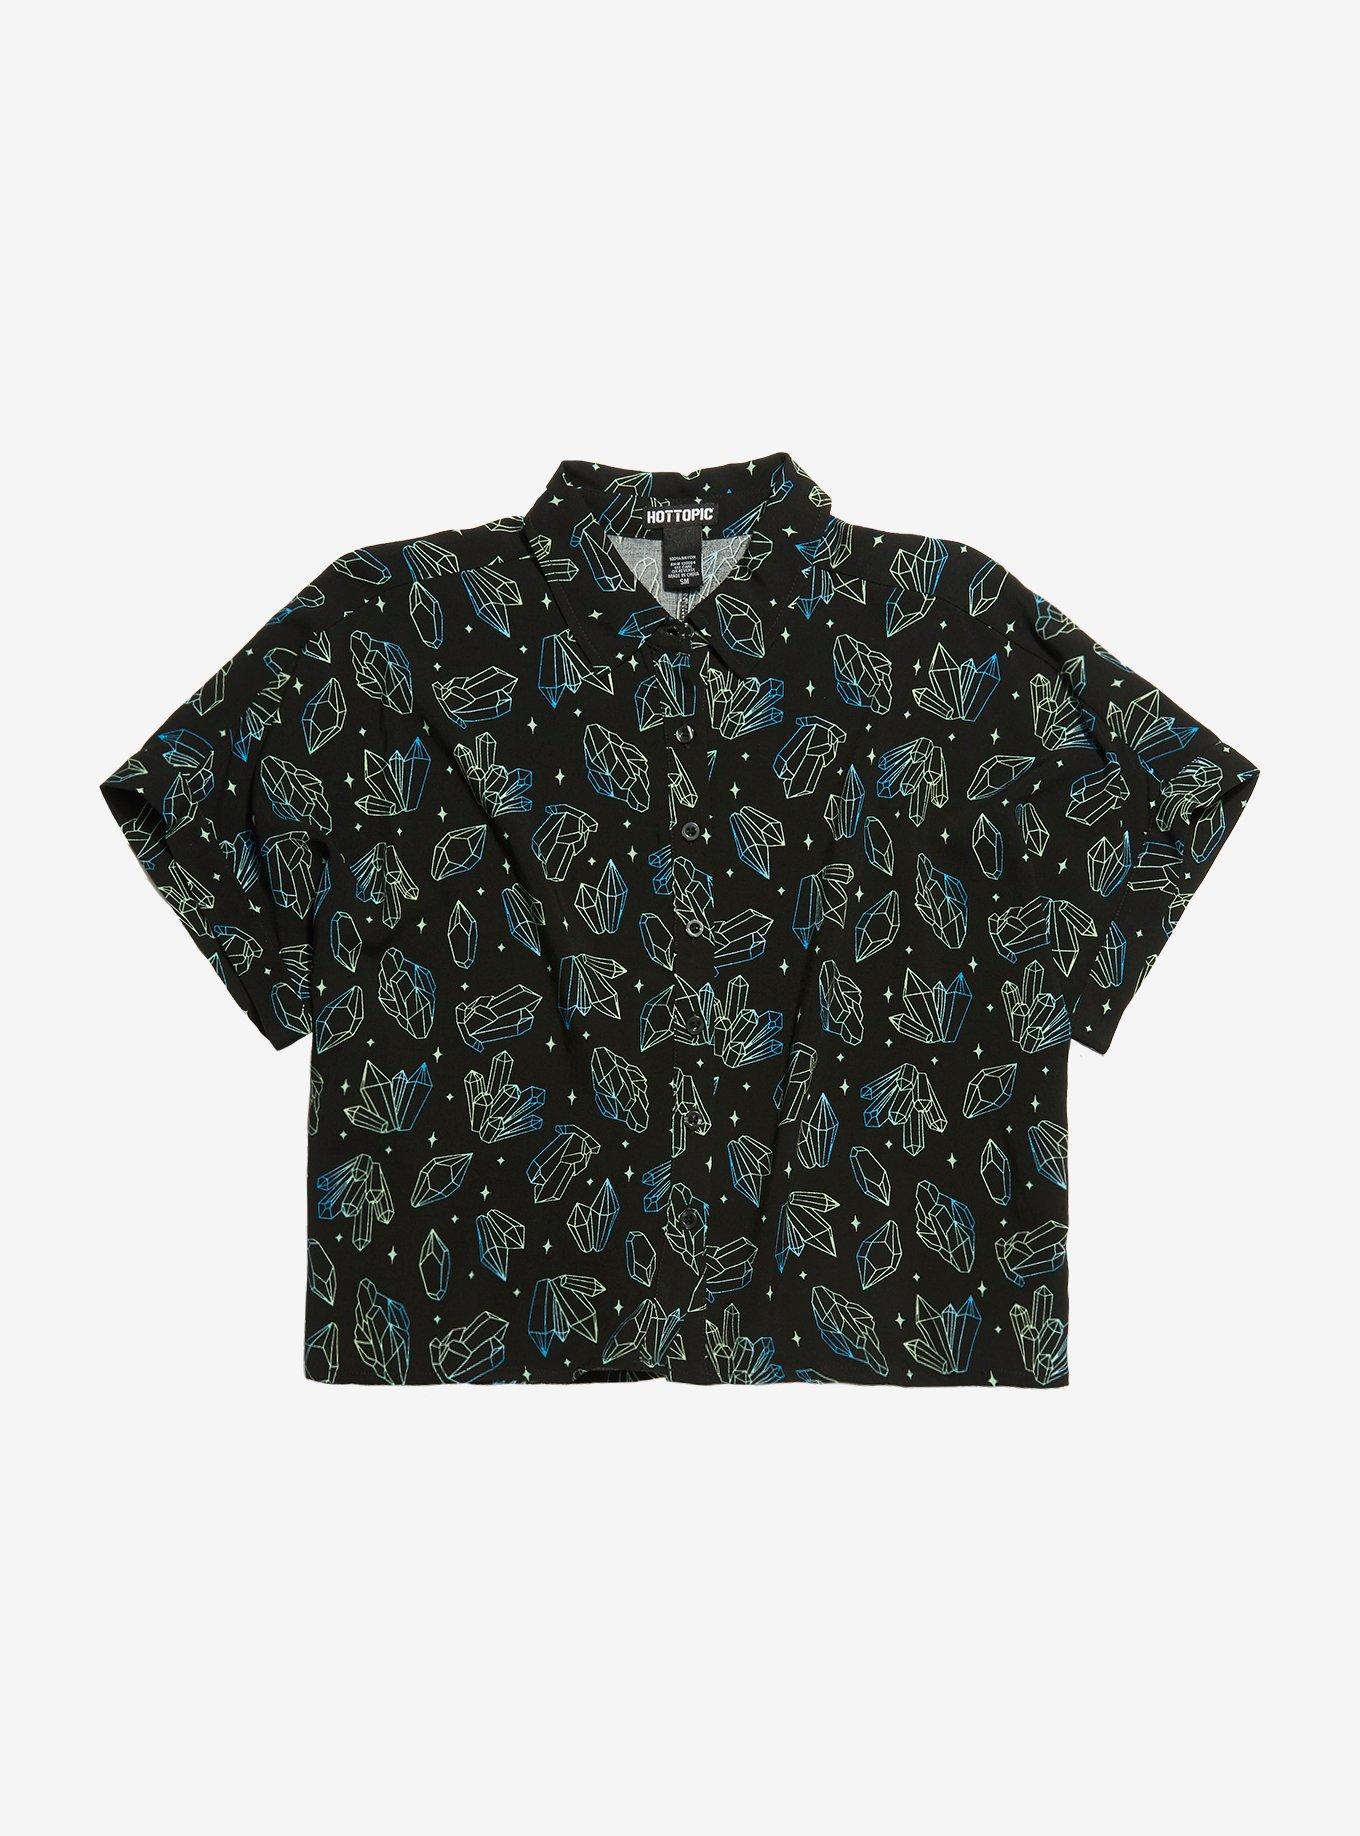 Teal Crystals Girls Woven Button-Up, TEAL, hi-res